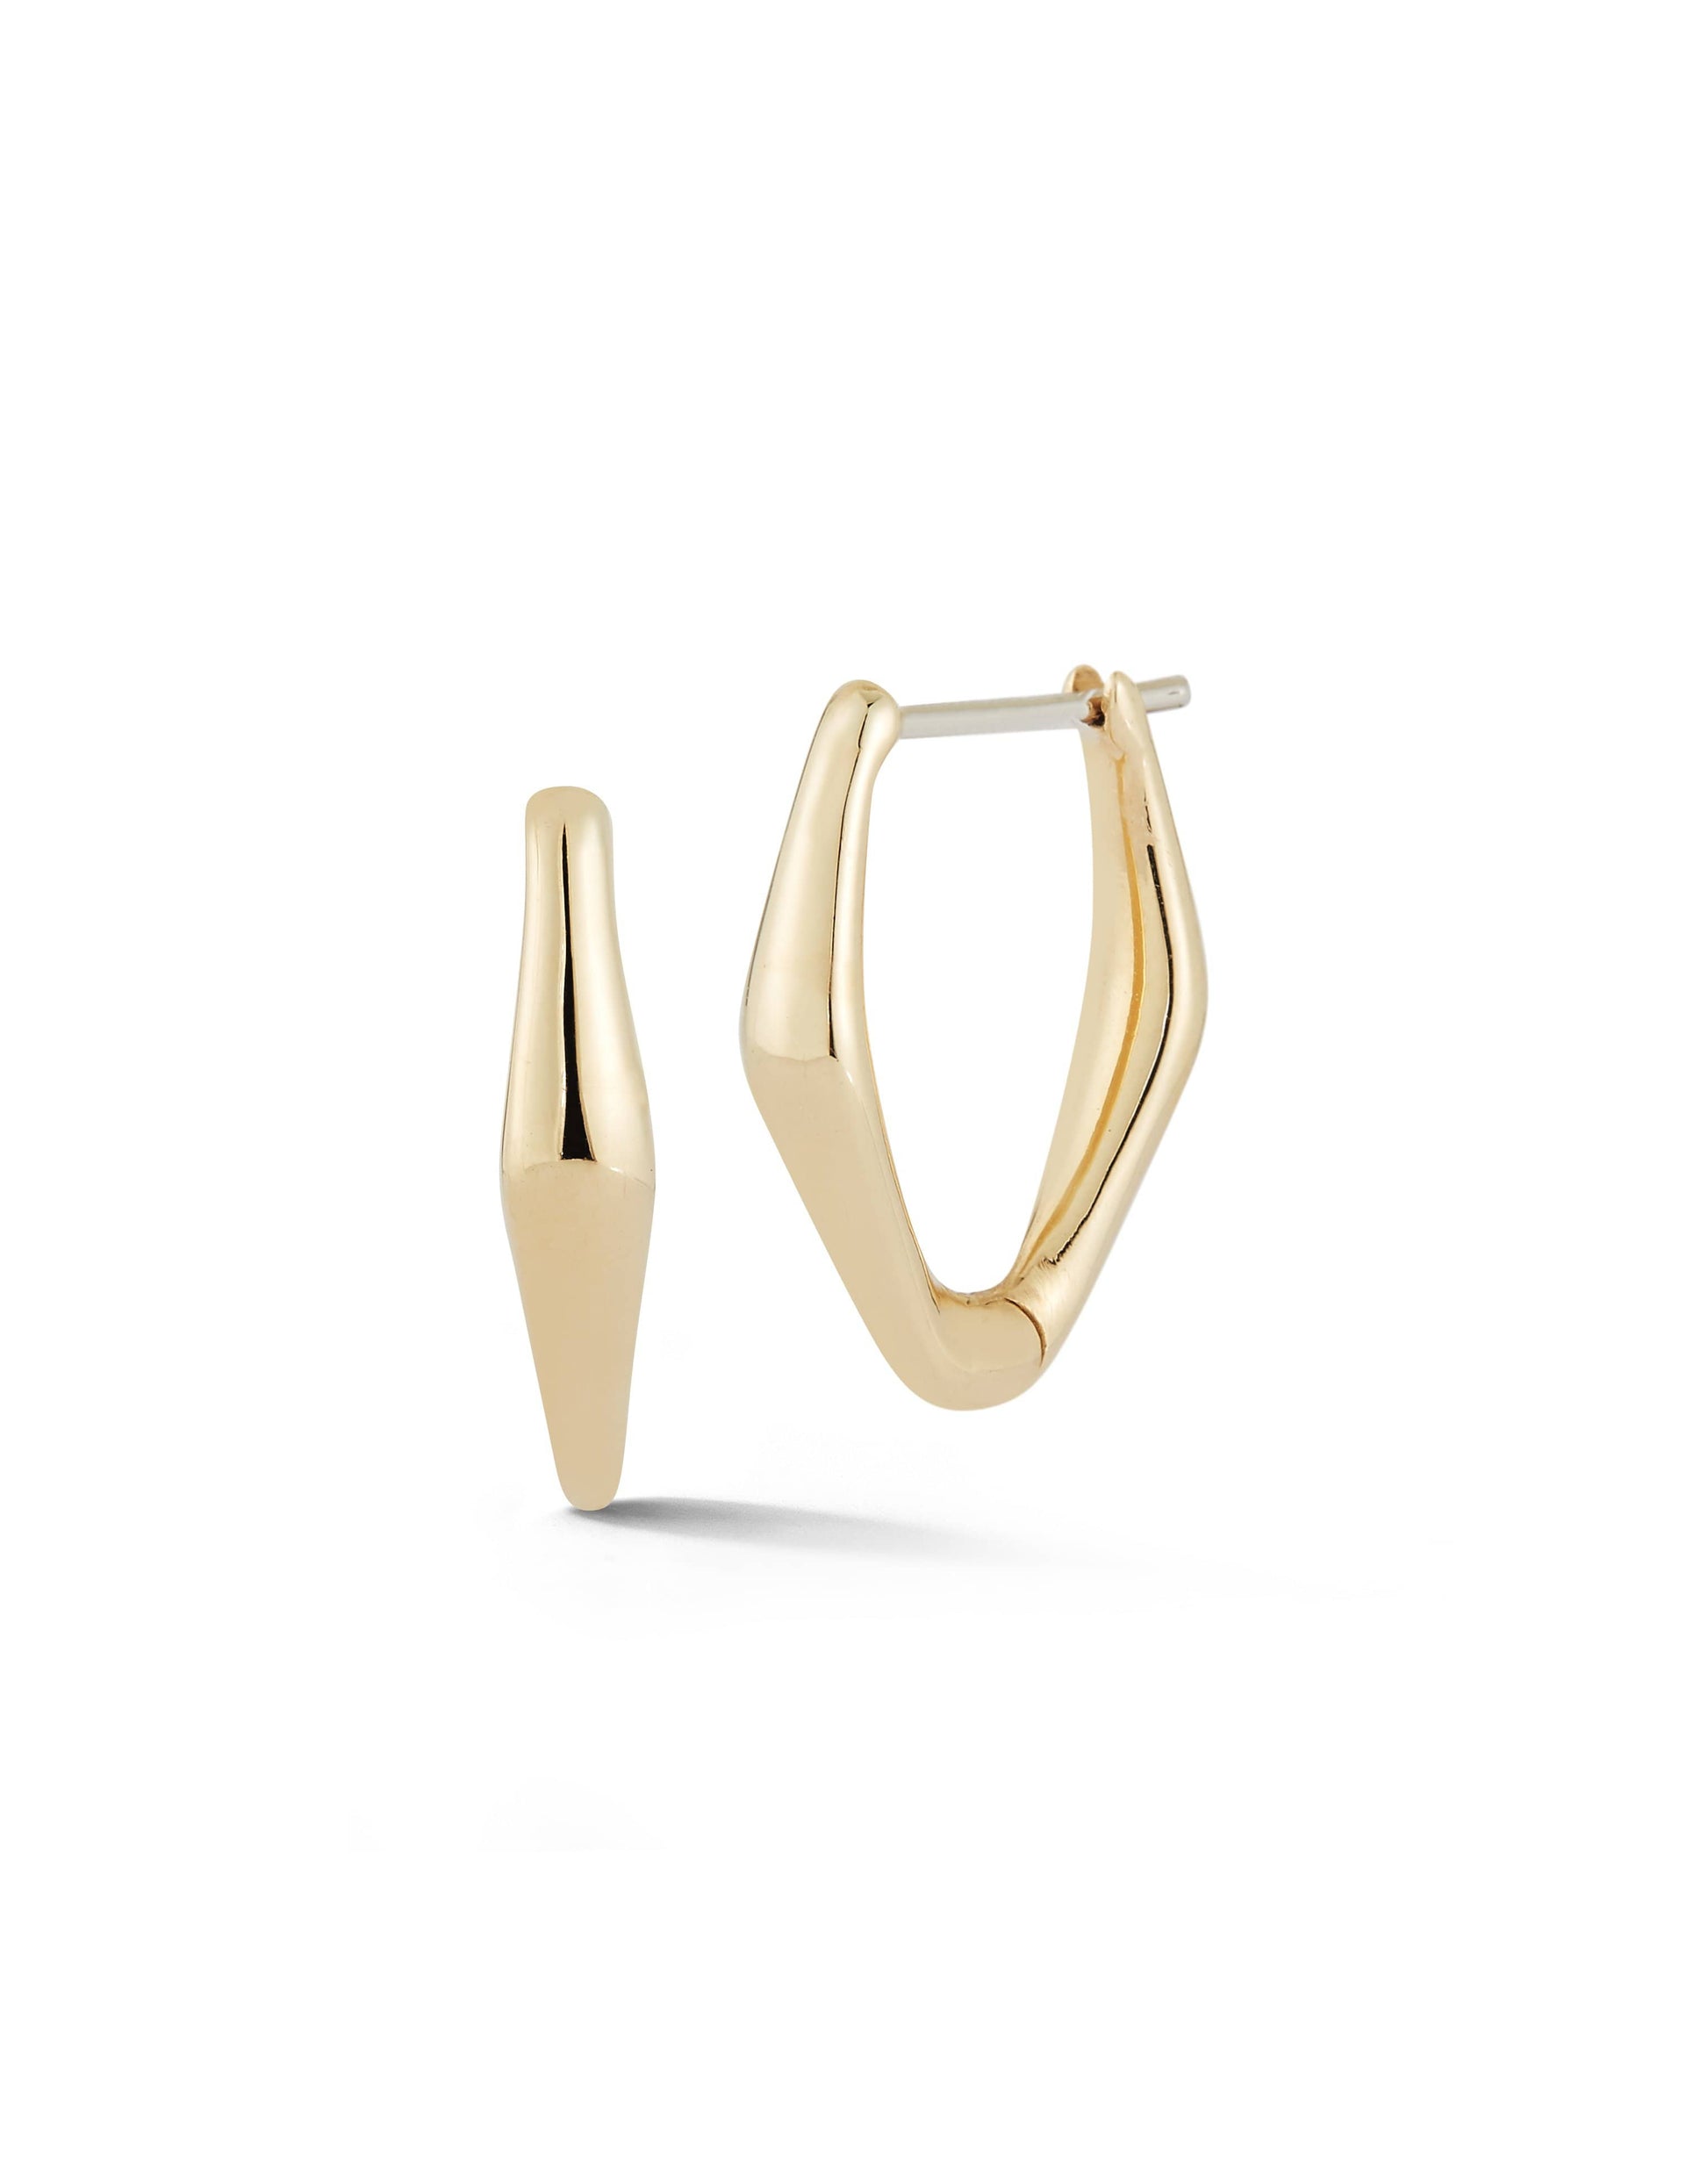 PARULINA-Small Gold Hoops-YELLOW GOLD